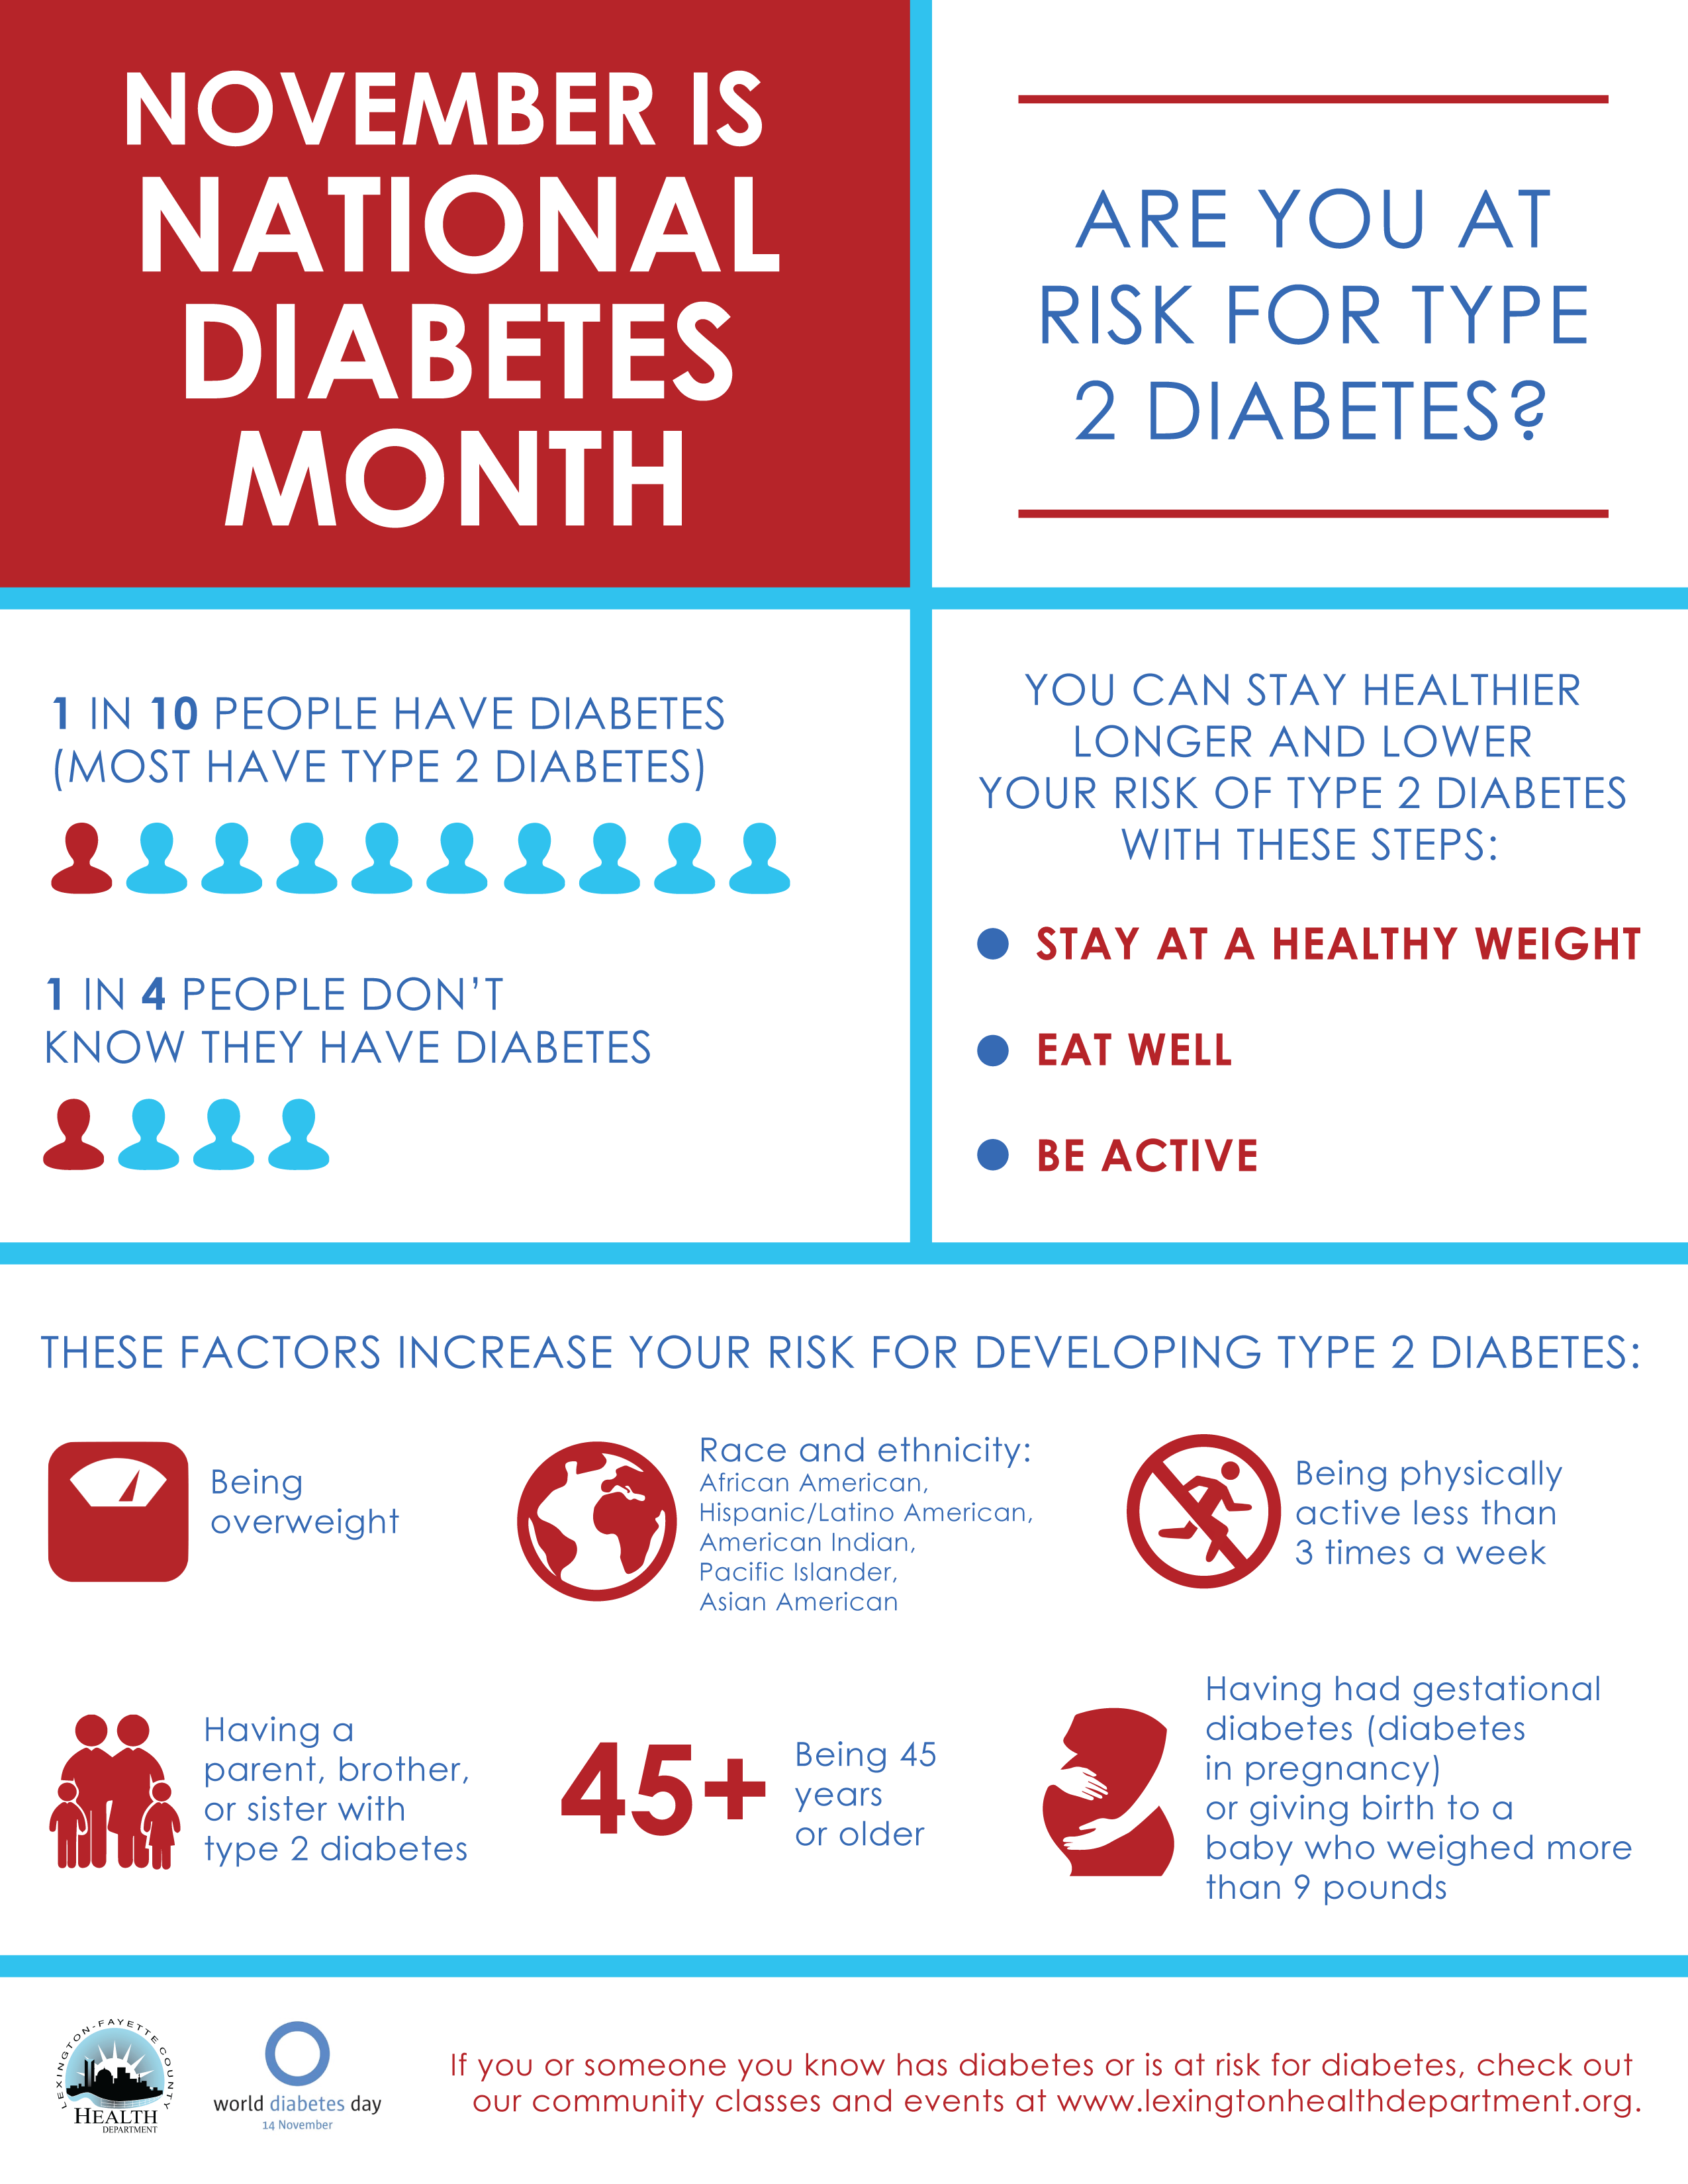 National Diabetes Month and World Diabetes Day